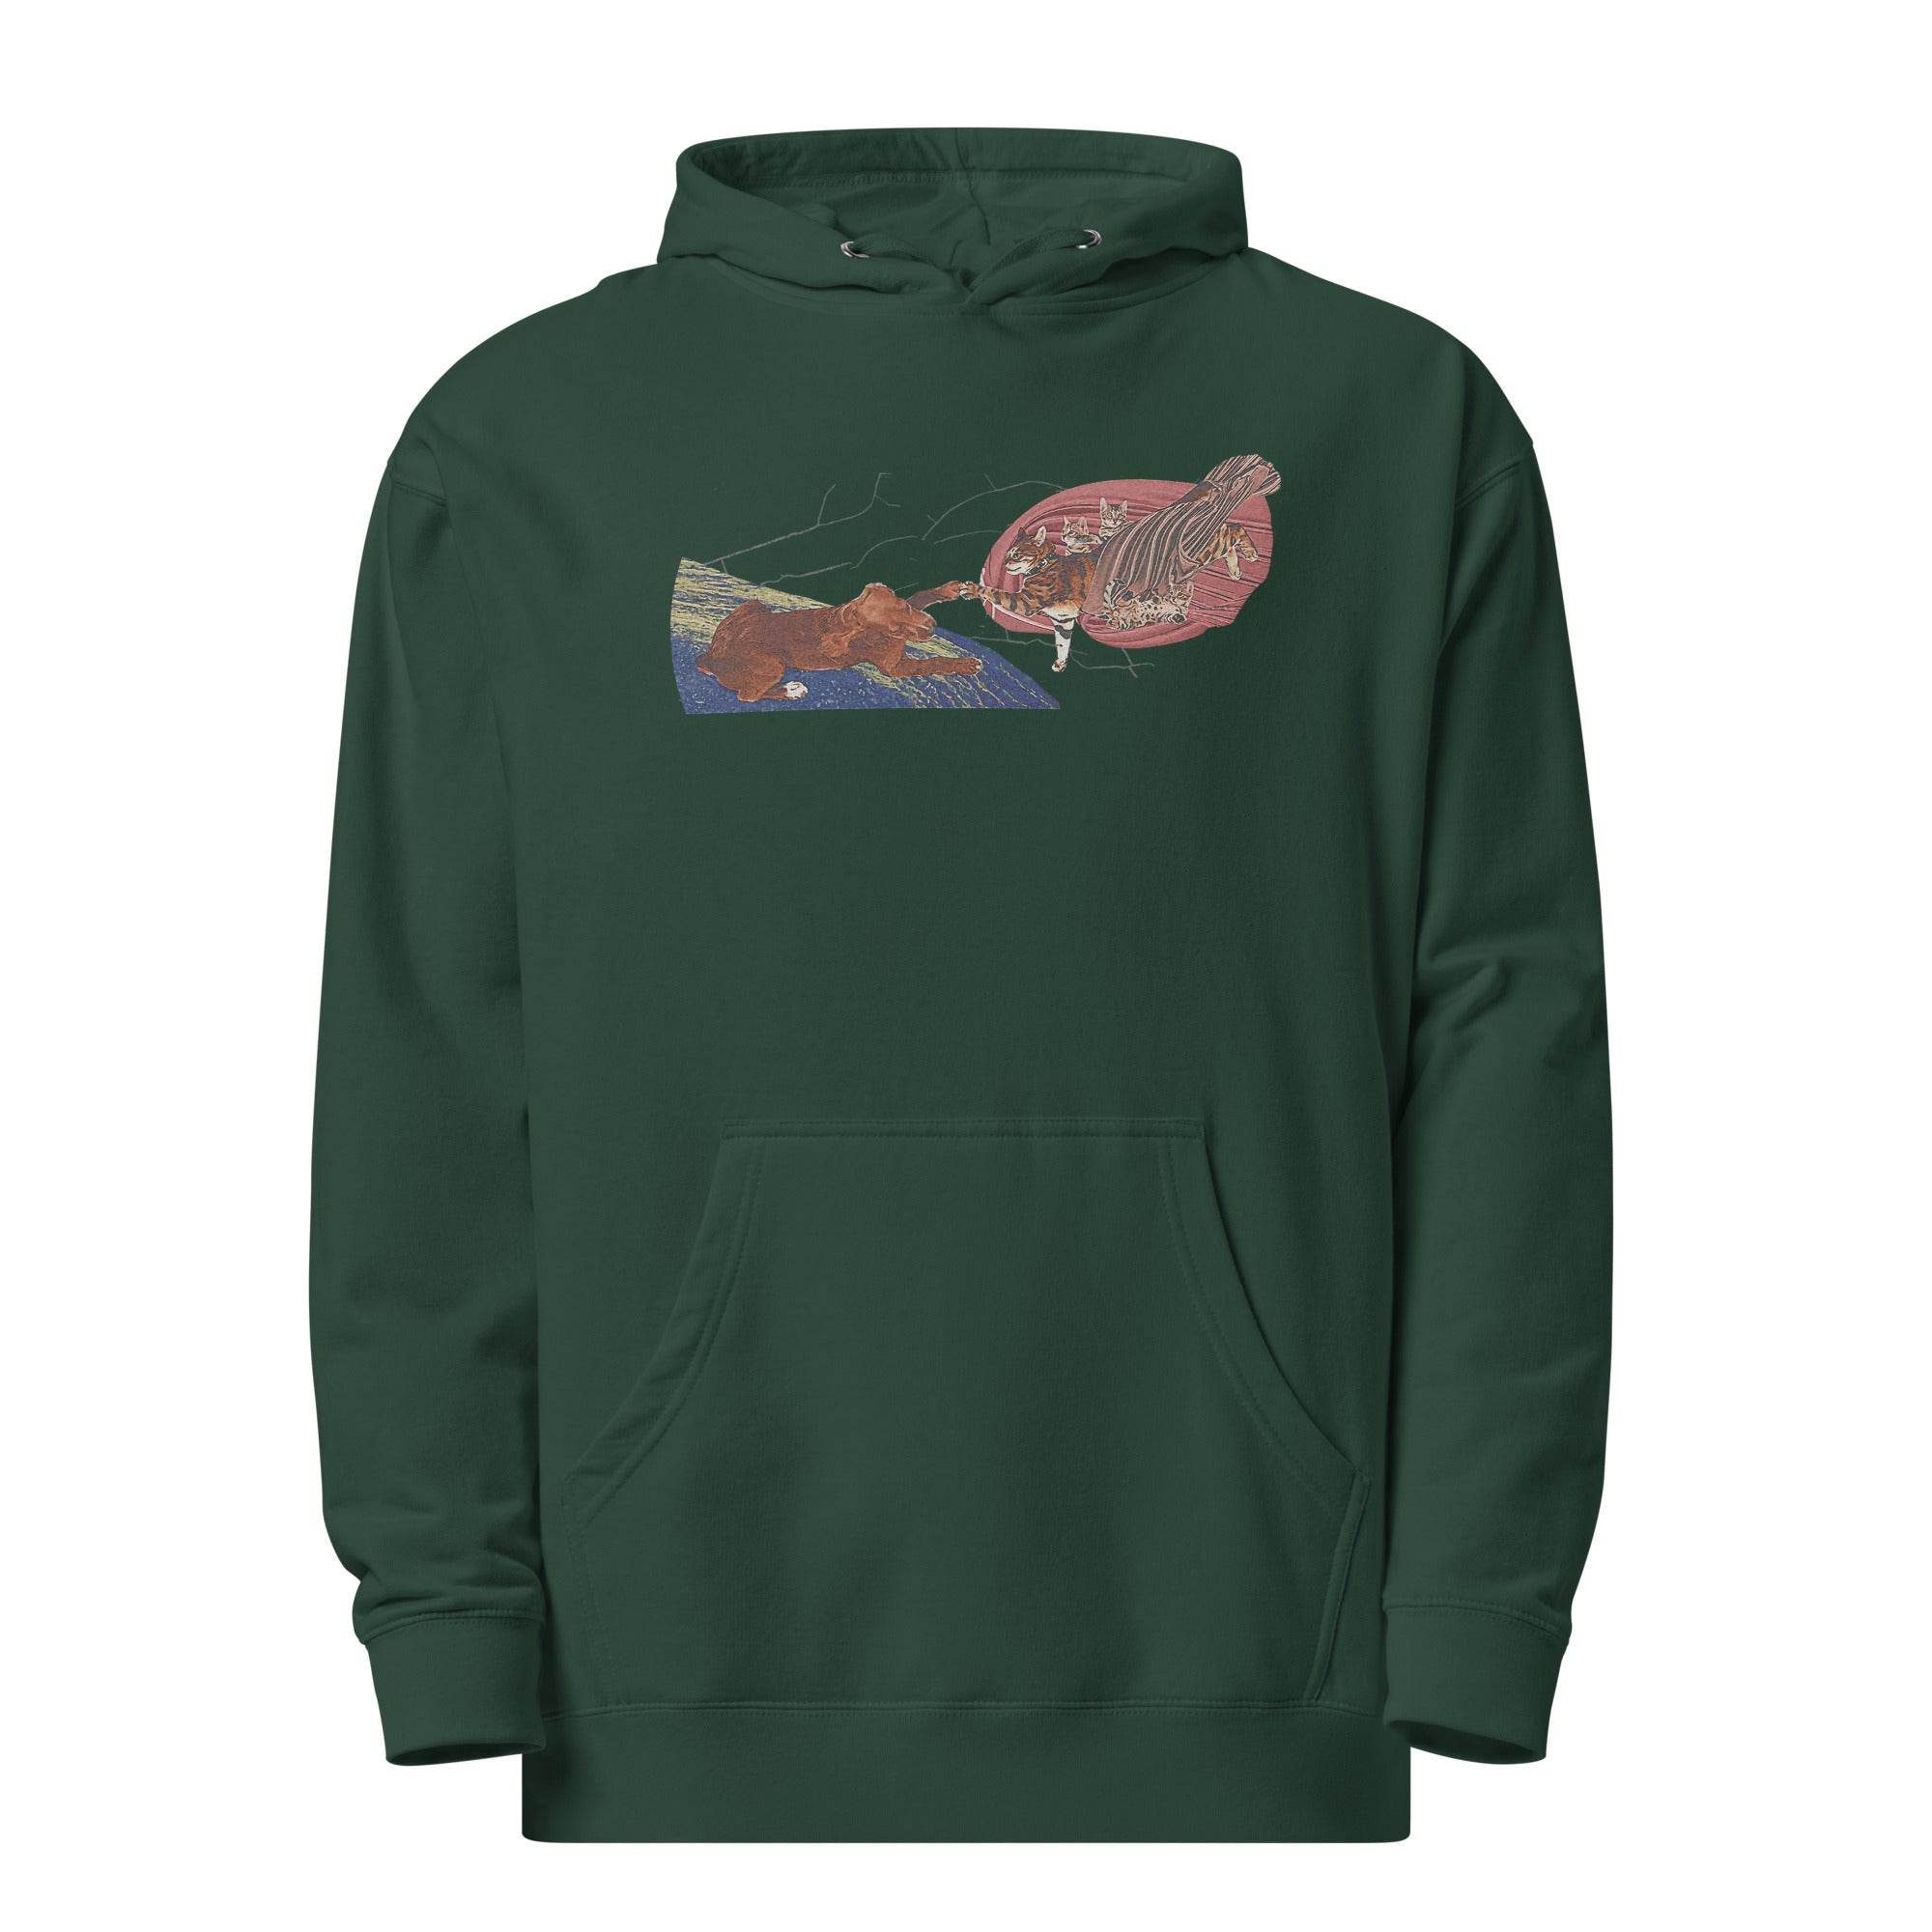 Creation of Dog Unisex midweight hoodie